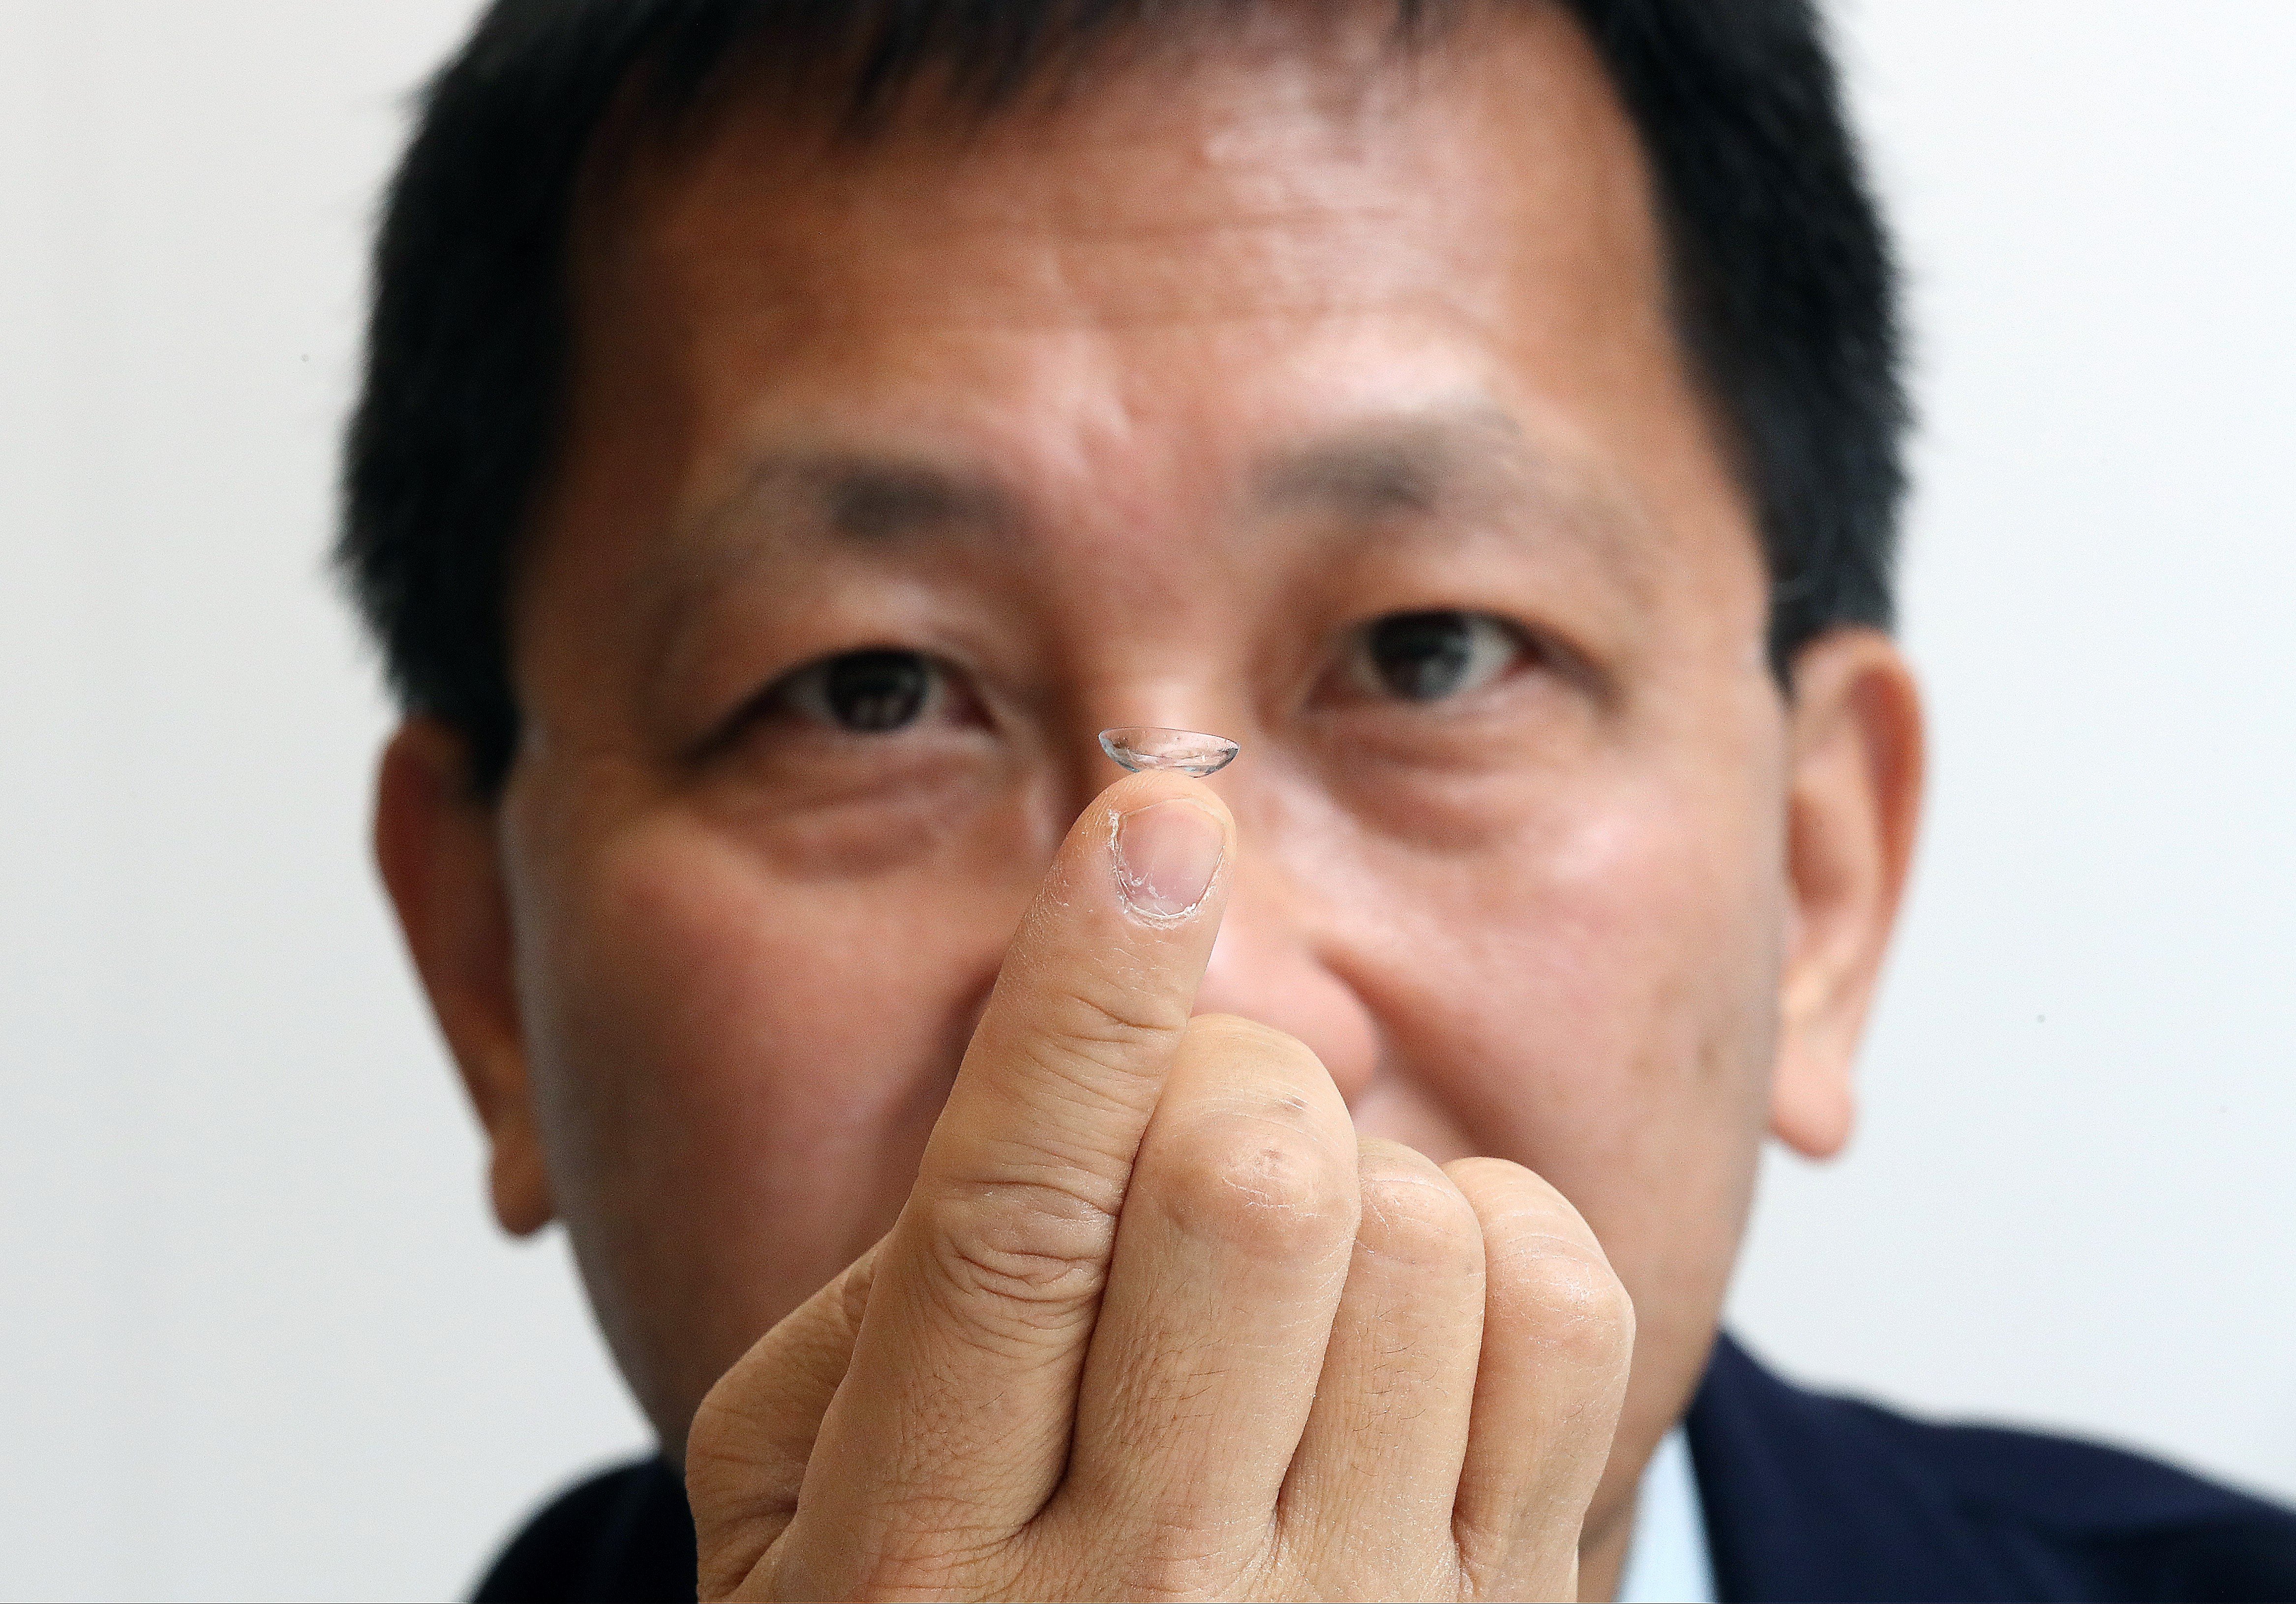 Vision Science founder Jackson Leung showing a contact lens that can reduce myopia in children. Photo: K.Y. Cheng